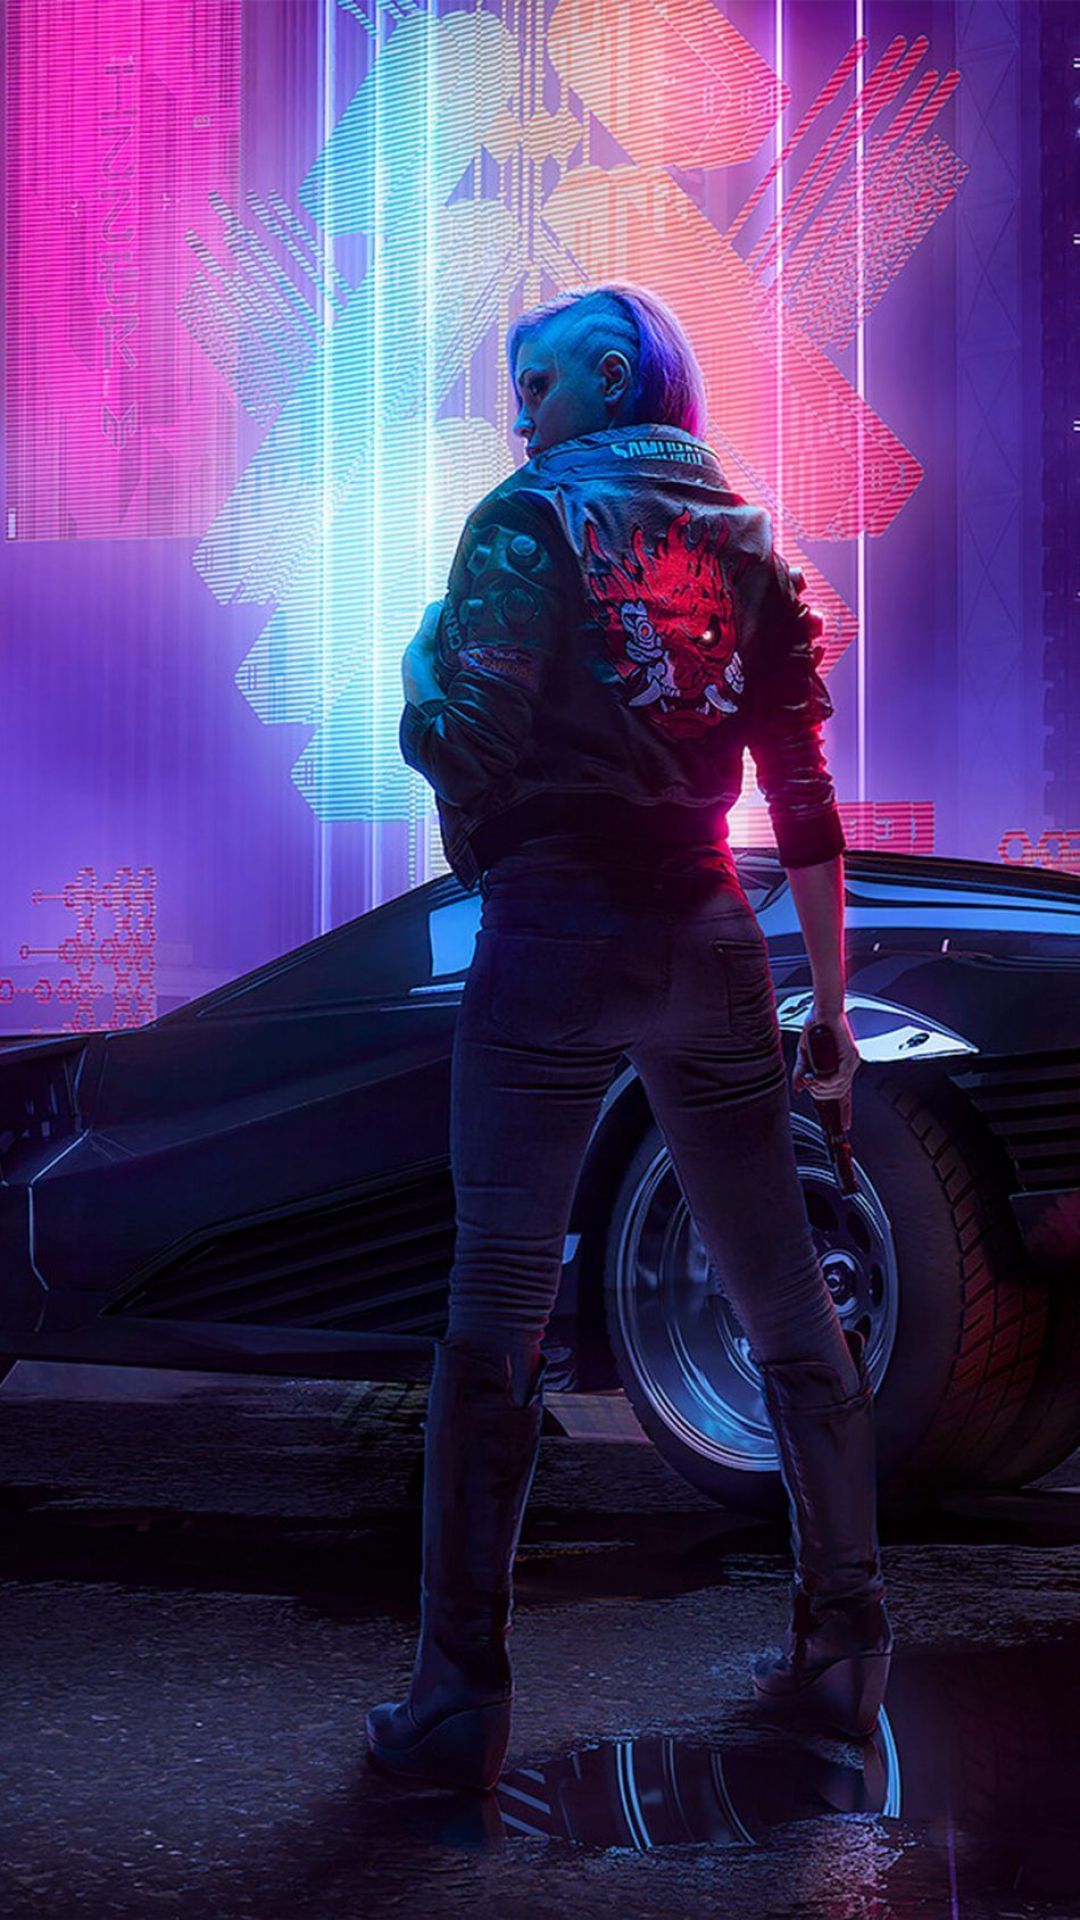 ✓[55+] Download Futuristic Cyberpunk 2077 Free Pure 4K Ultra HD Mobile -  Android / iPhone HD Wallpaper Background Download (png / jpg) (2023)